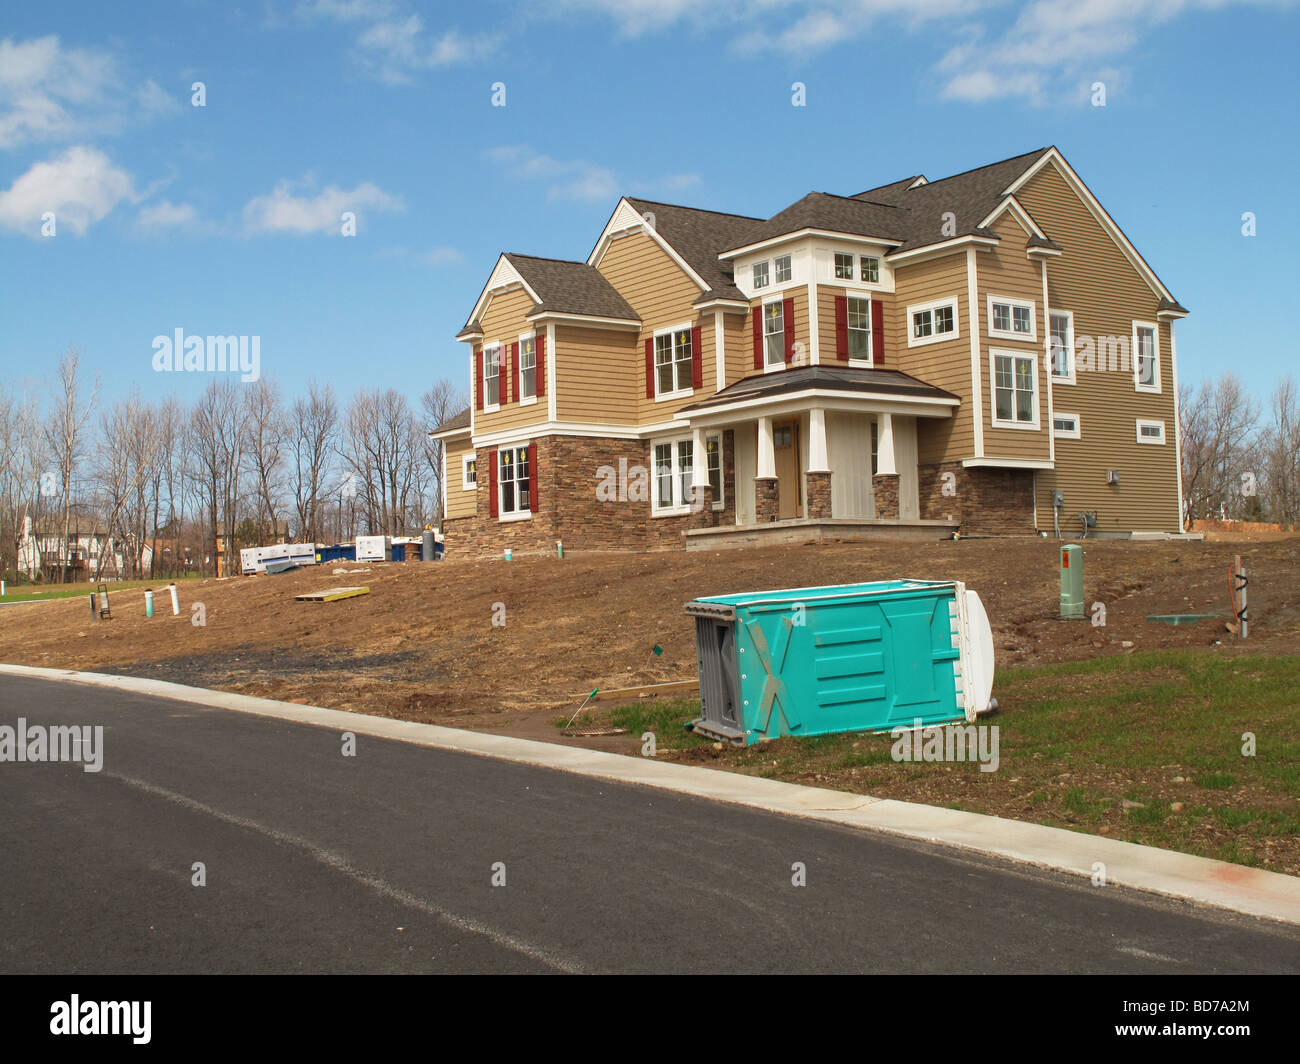 New single family home being built in Fairport, NY USA. Stock Photo